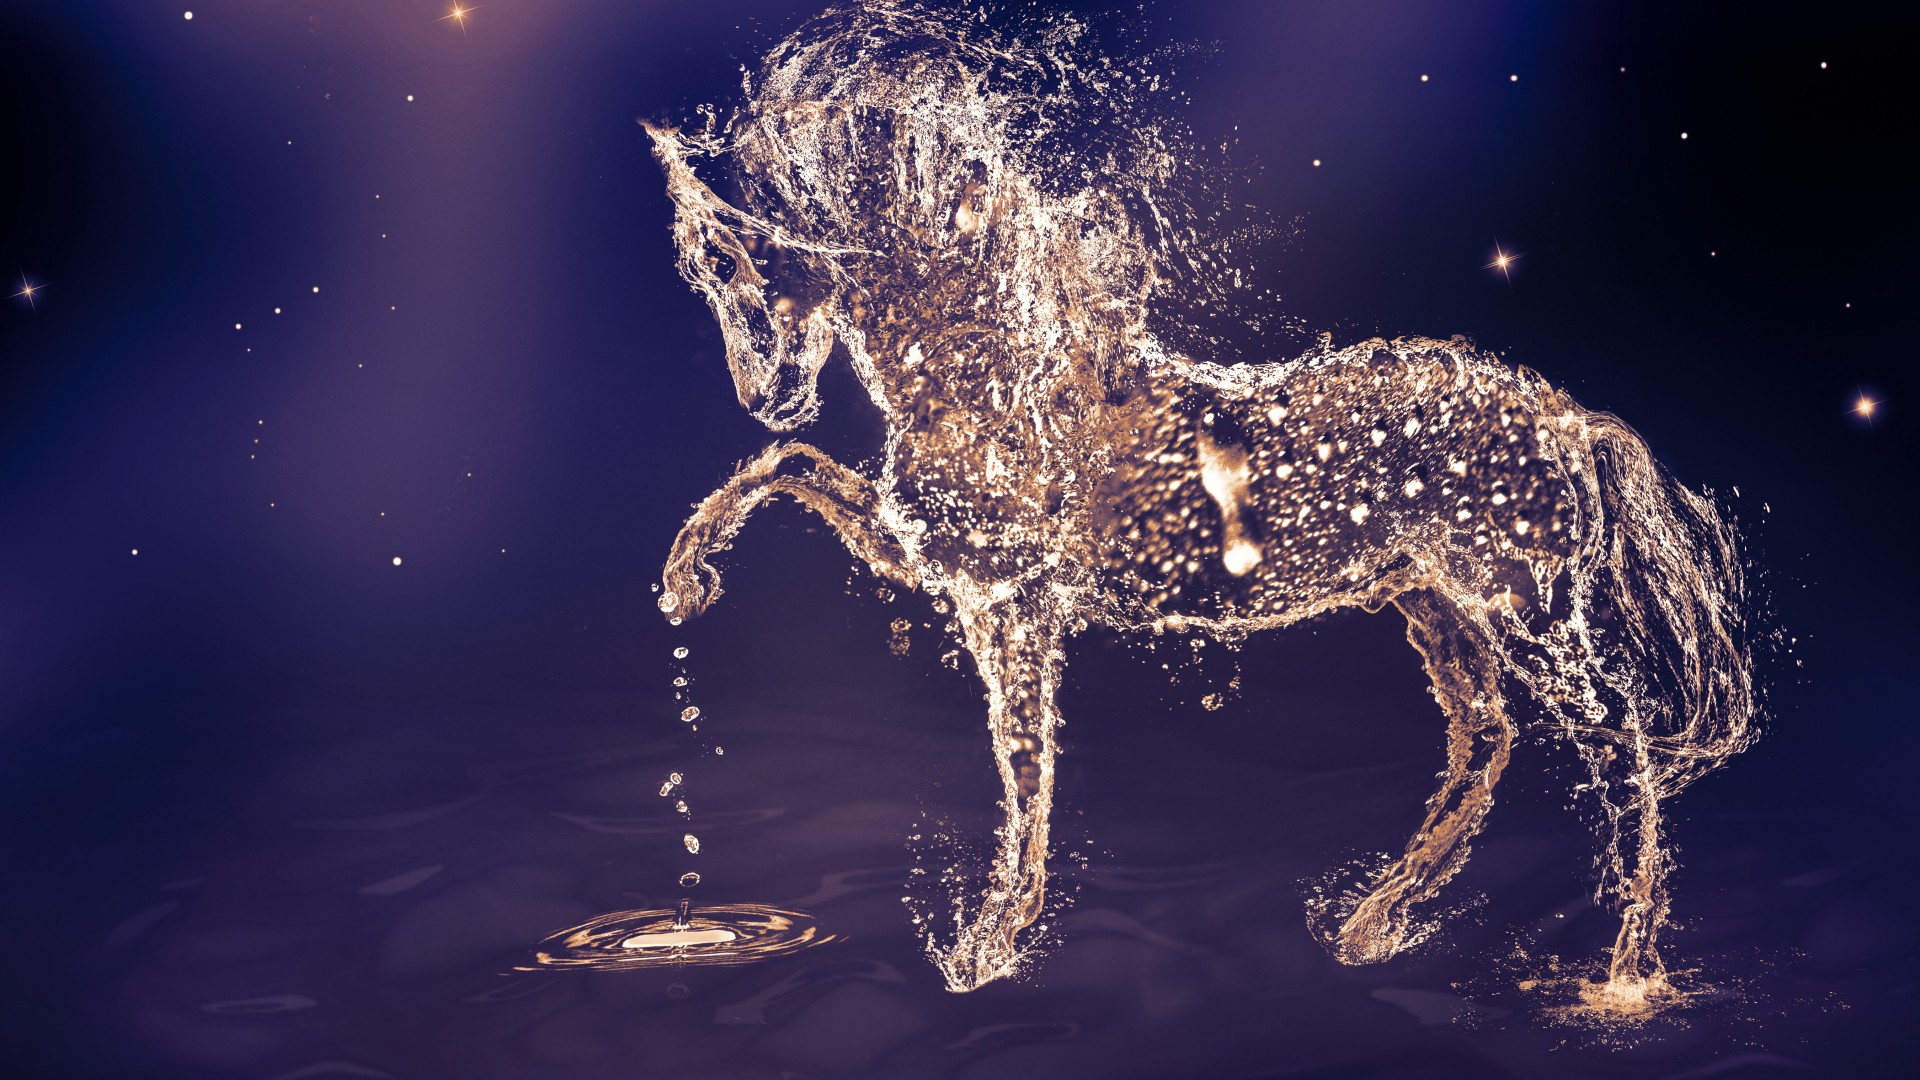 Artistic Water Horse Wallpaper - Galaxy Room For Girls , HD Wallpaper & Backgrounds